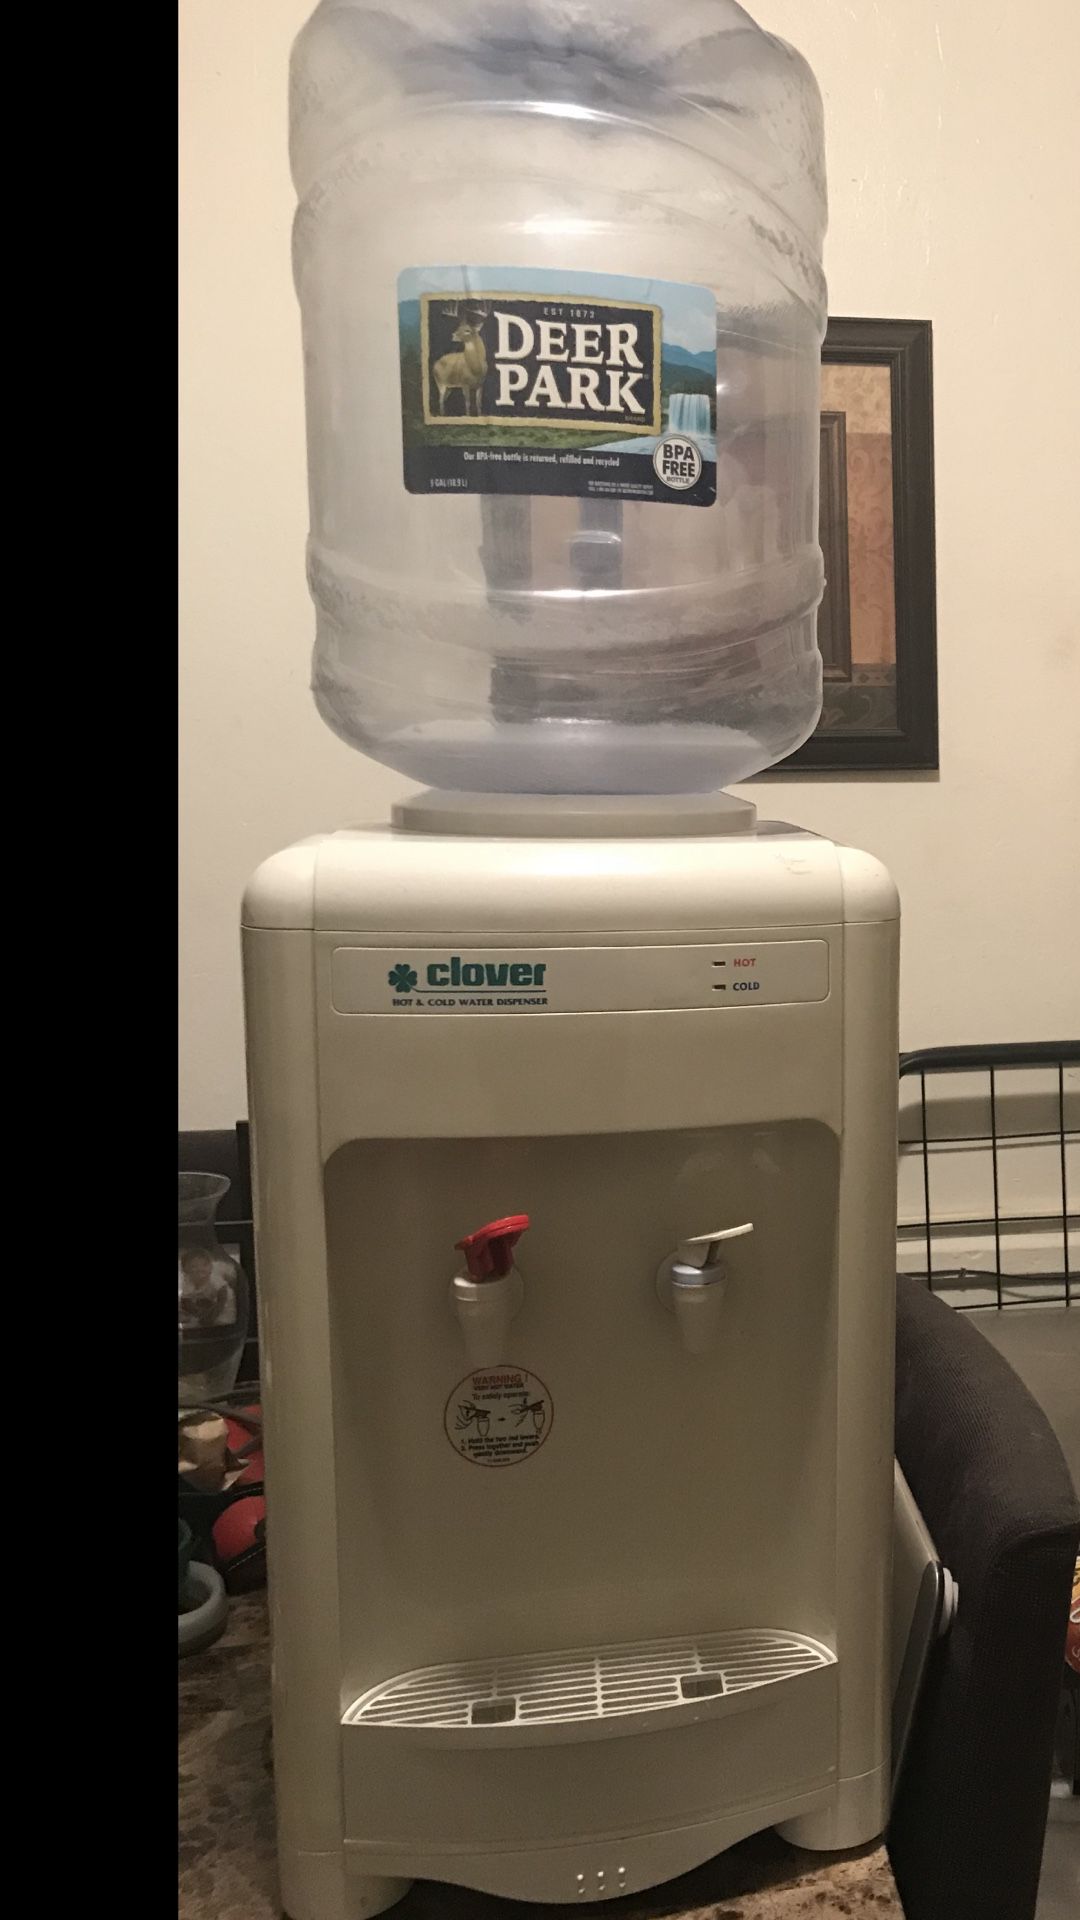 Hot and cold water dispenser works great very clean